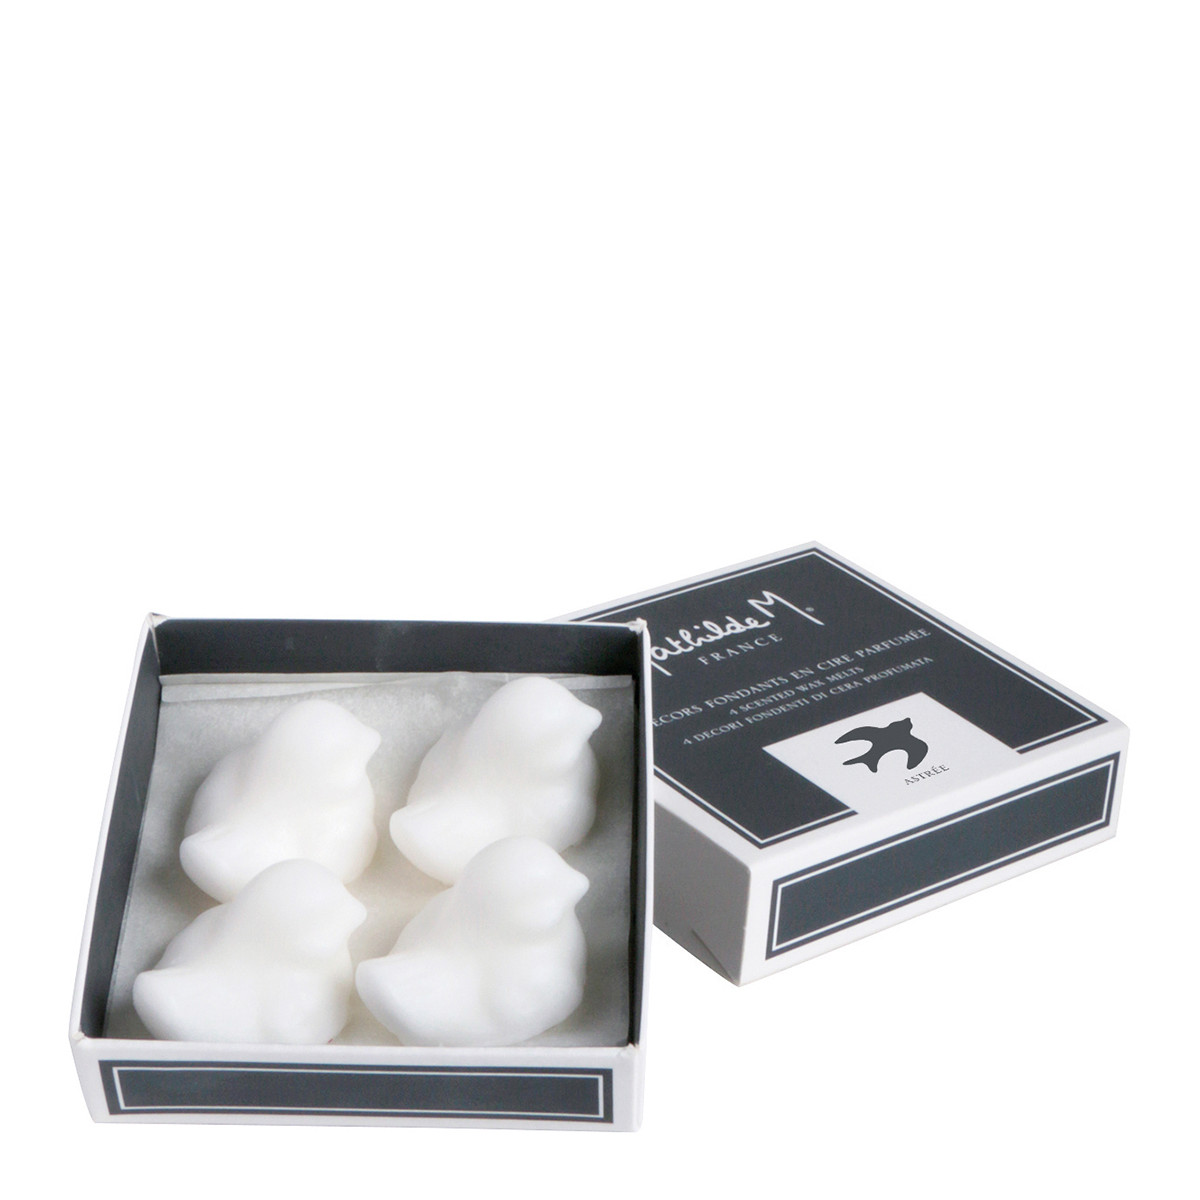 Scent-A-Bration Box New - Wax Melt Addition - Wix Wax Candle Company